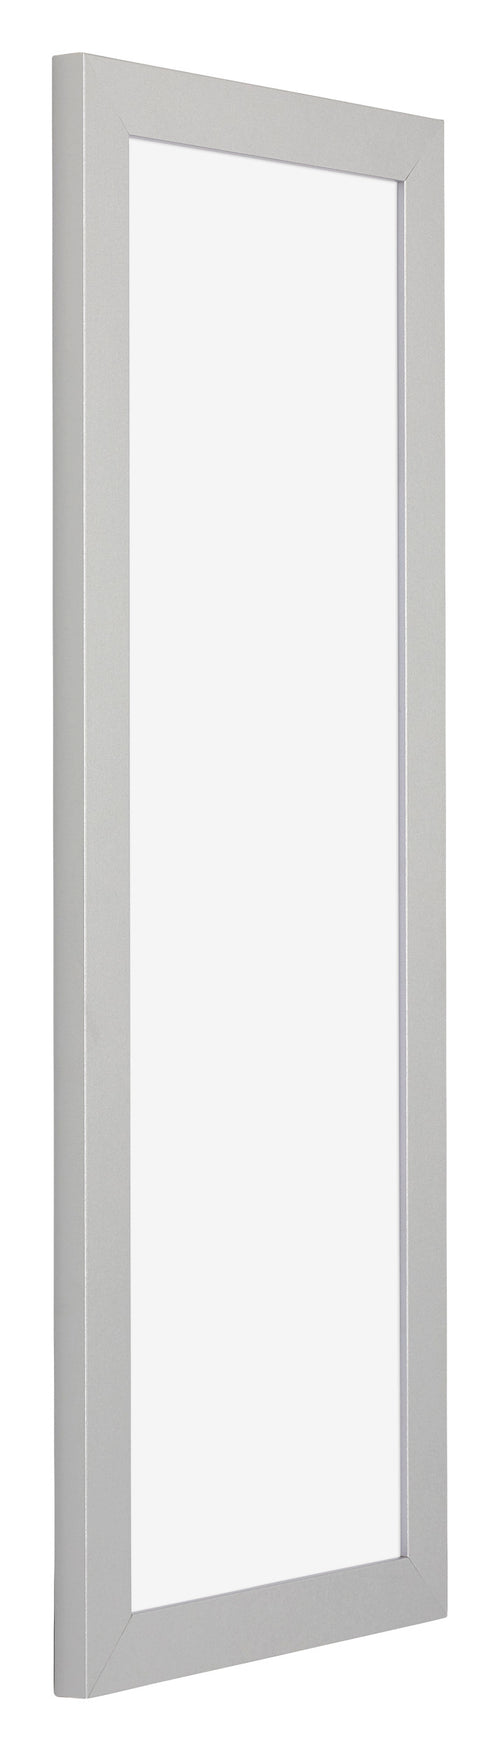 Mura MDF Photo Frame 25x75cm Red Front Oblique | Yourdecoration.co.uk